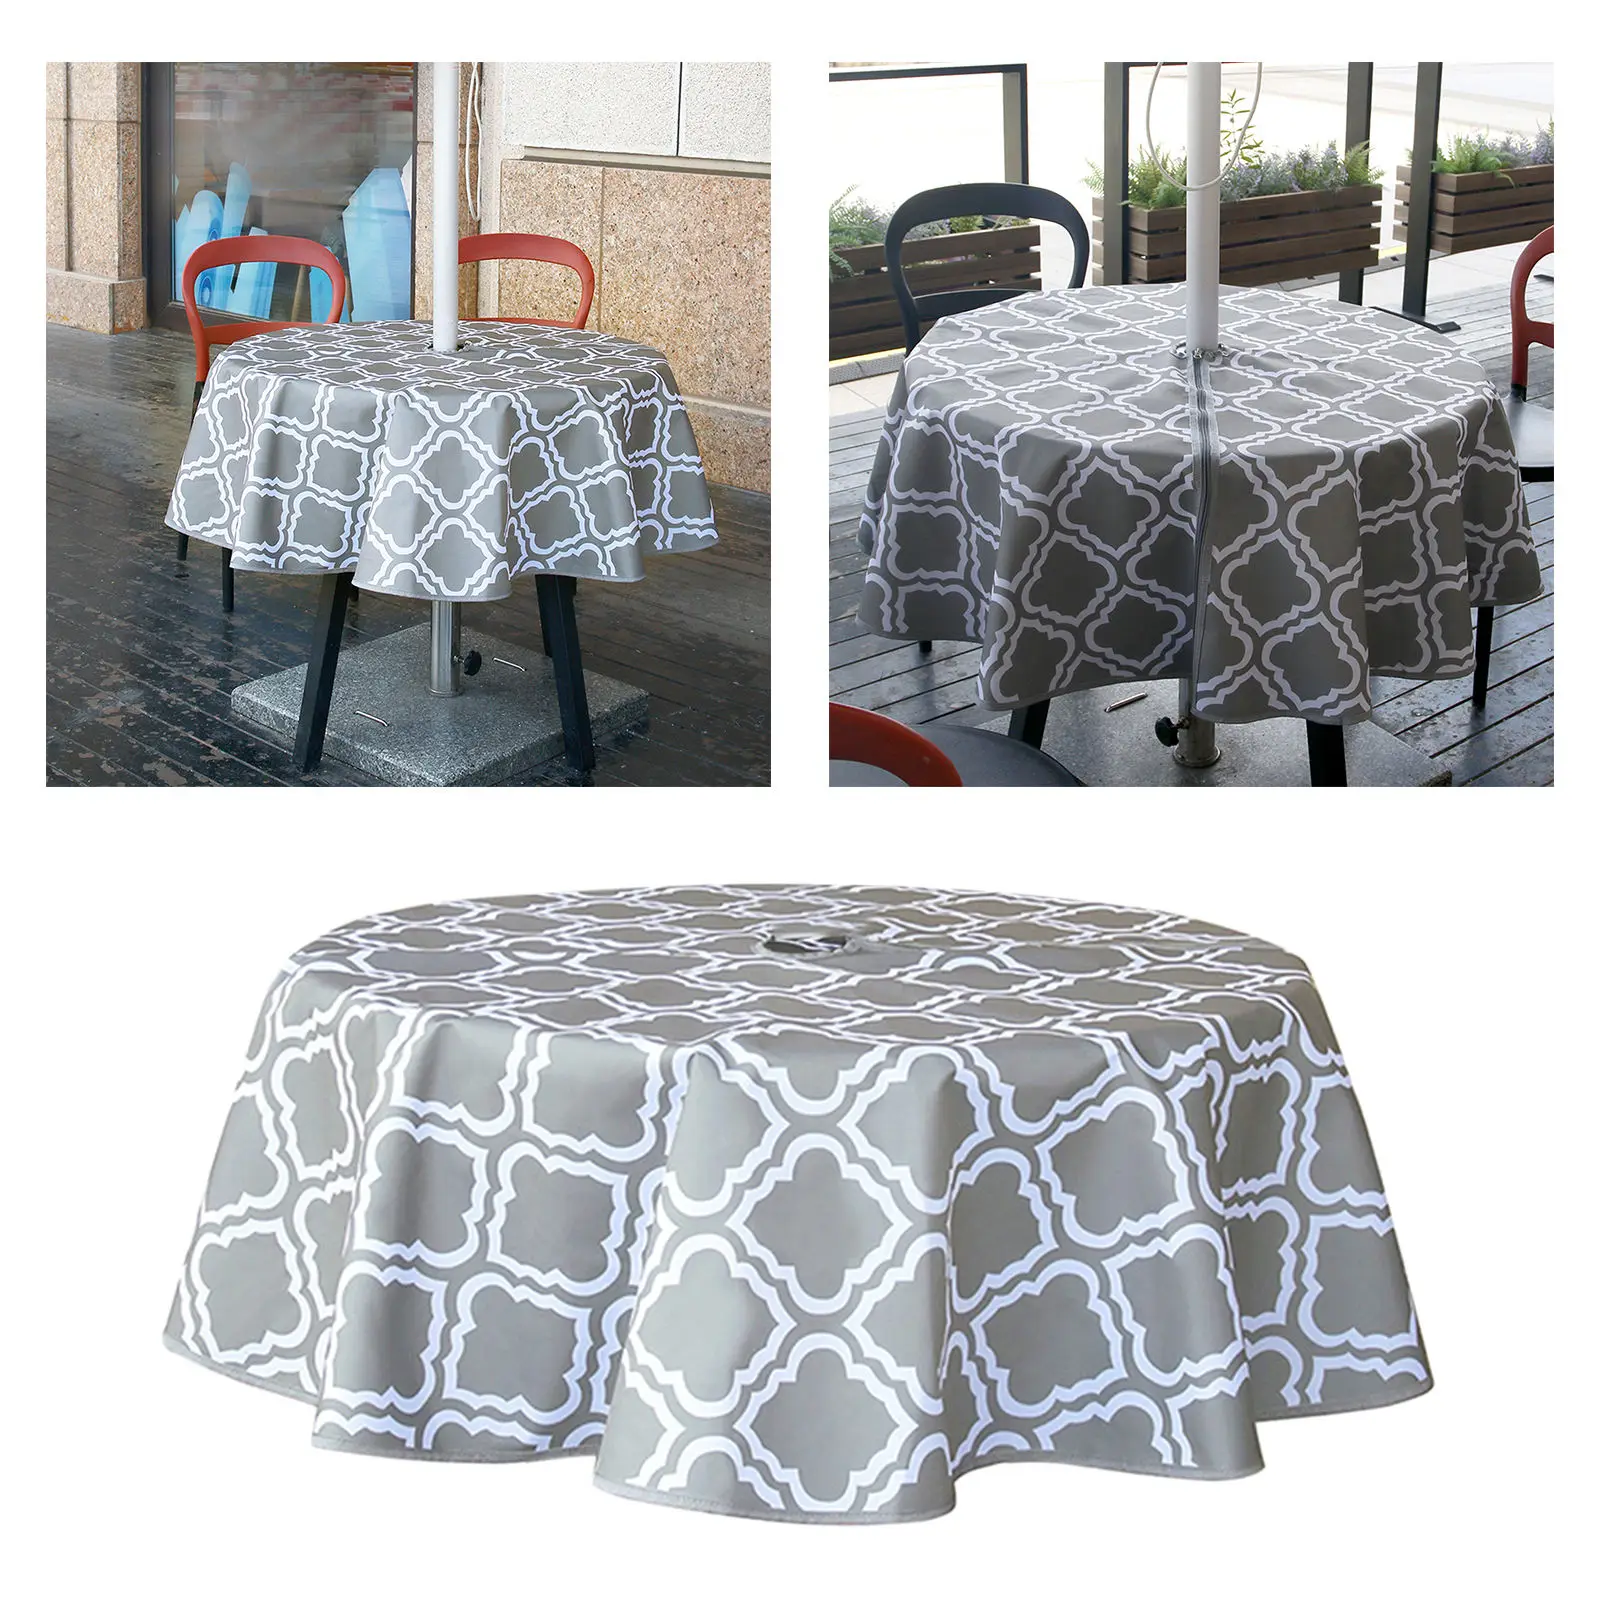 Waterproof Oilproof Polyester Zippered Fitted Outdoor Patio Table Cloth w/ Umbrella Hole Coffee Table Cover for Garden Parties